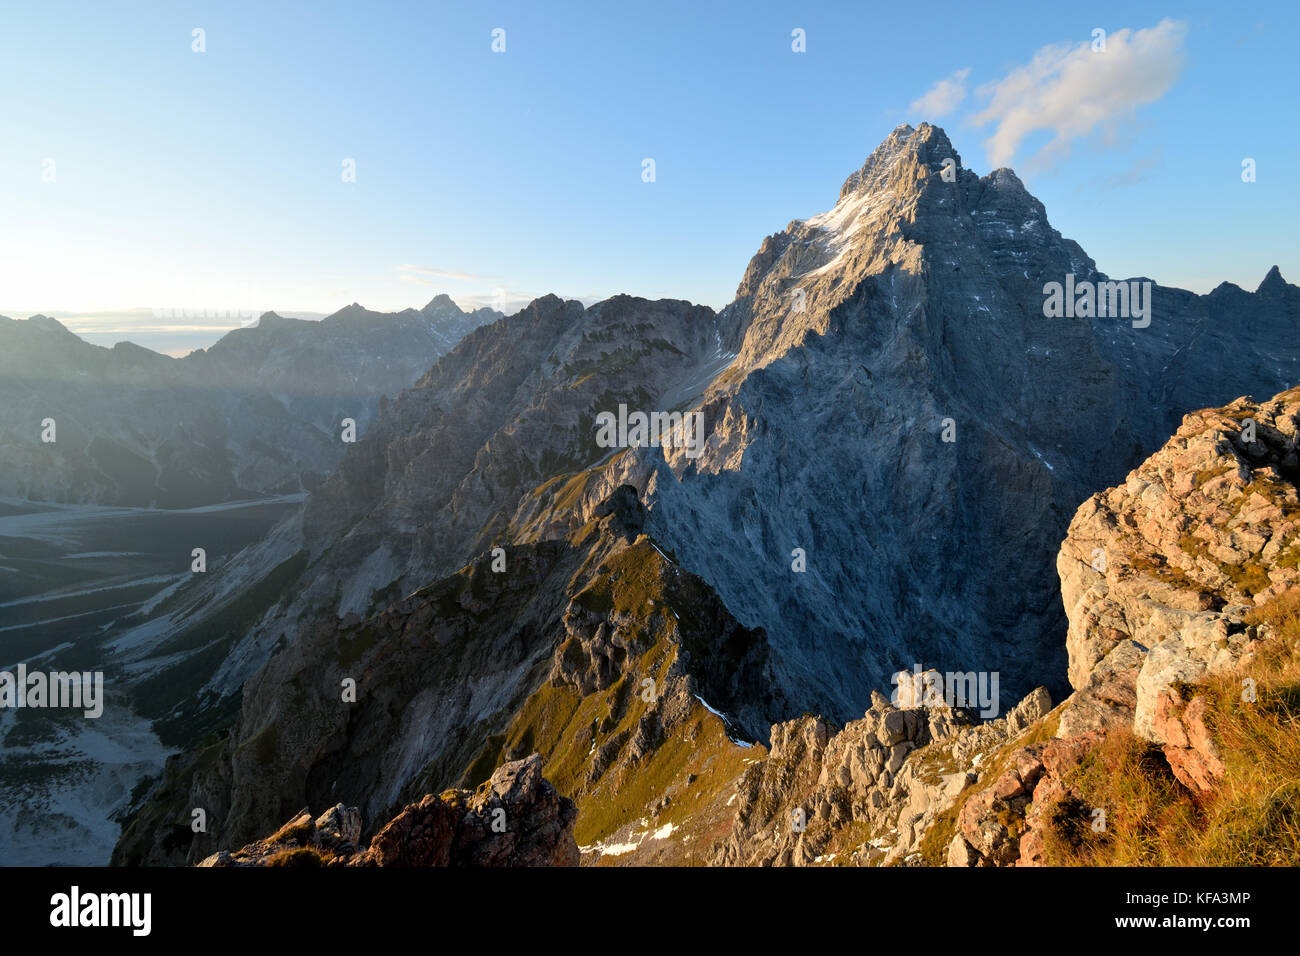 Famous Mt. Watzmann at Berchtesgaden national park, Bavaria, Germany, seen from its back side at sunset Stock Photo